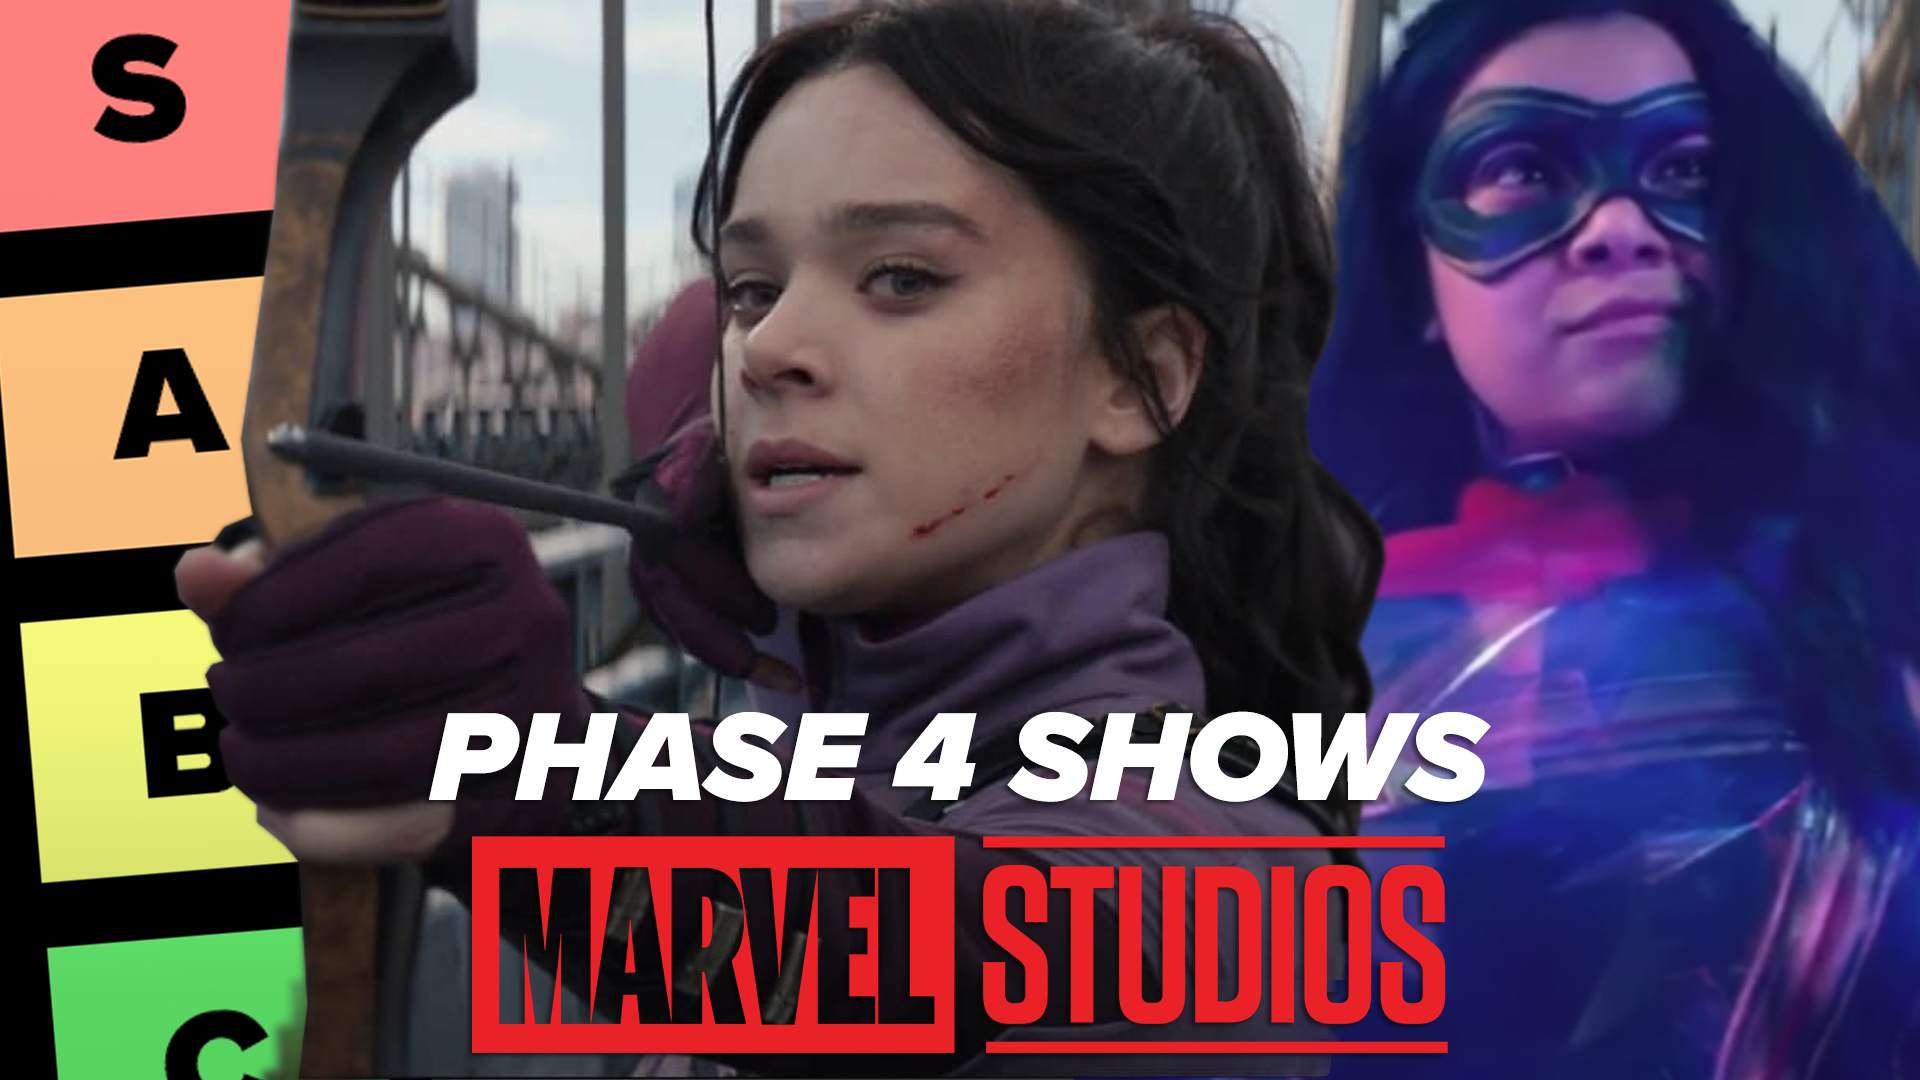 From Wanda enslaving an entire town to She-Hulk breaking the fourth wall, the Phase 4 shows broke the Marvel Cinematic Universe in all the best ways.